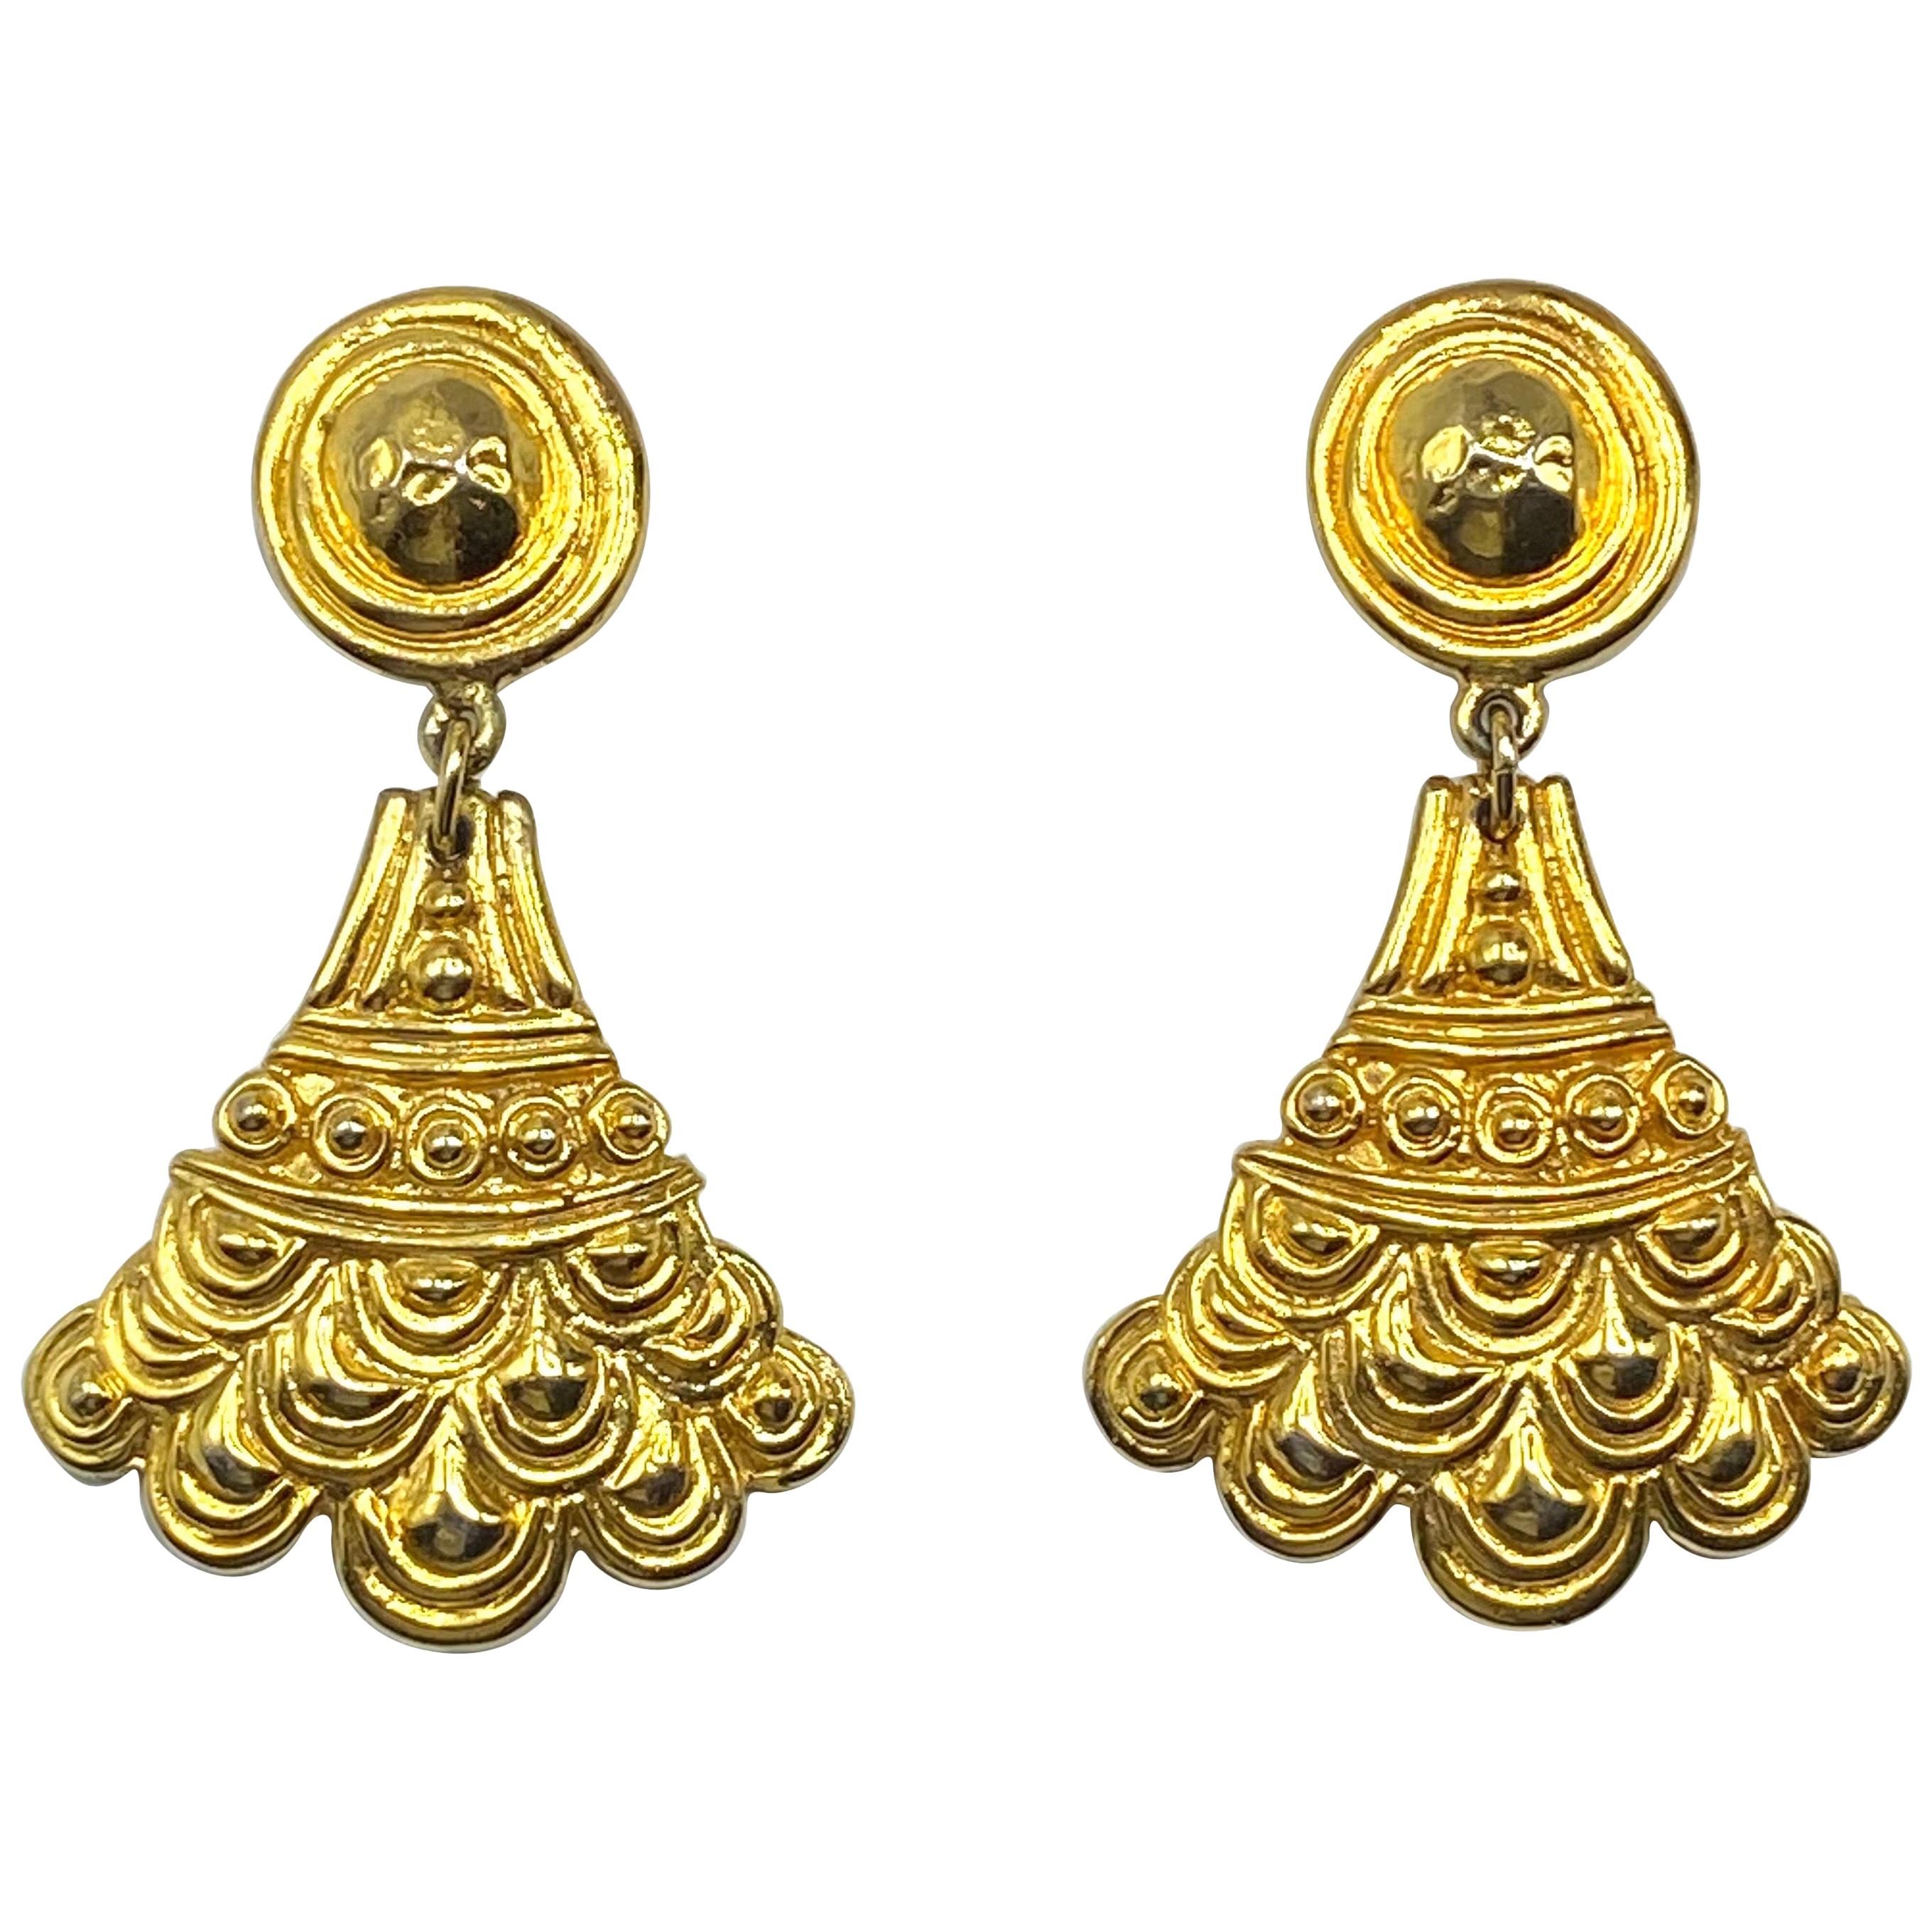 Christian Dior, Grosse Germany Etruscan Style Pendant Earrings from 1974